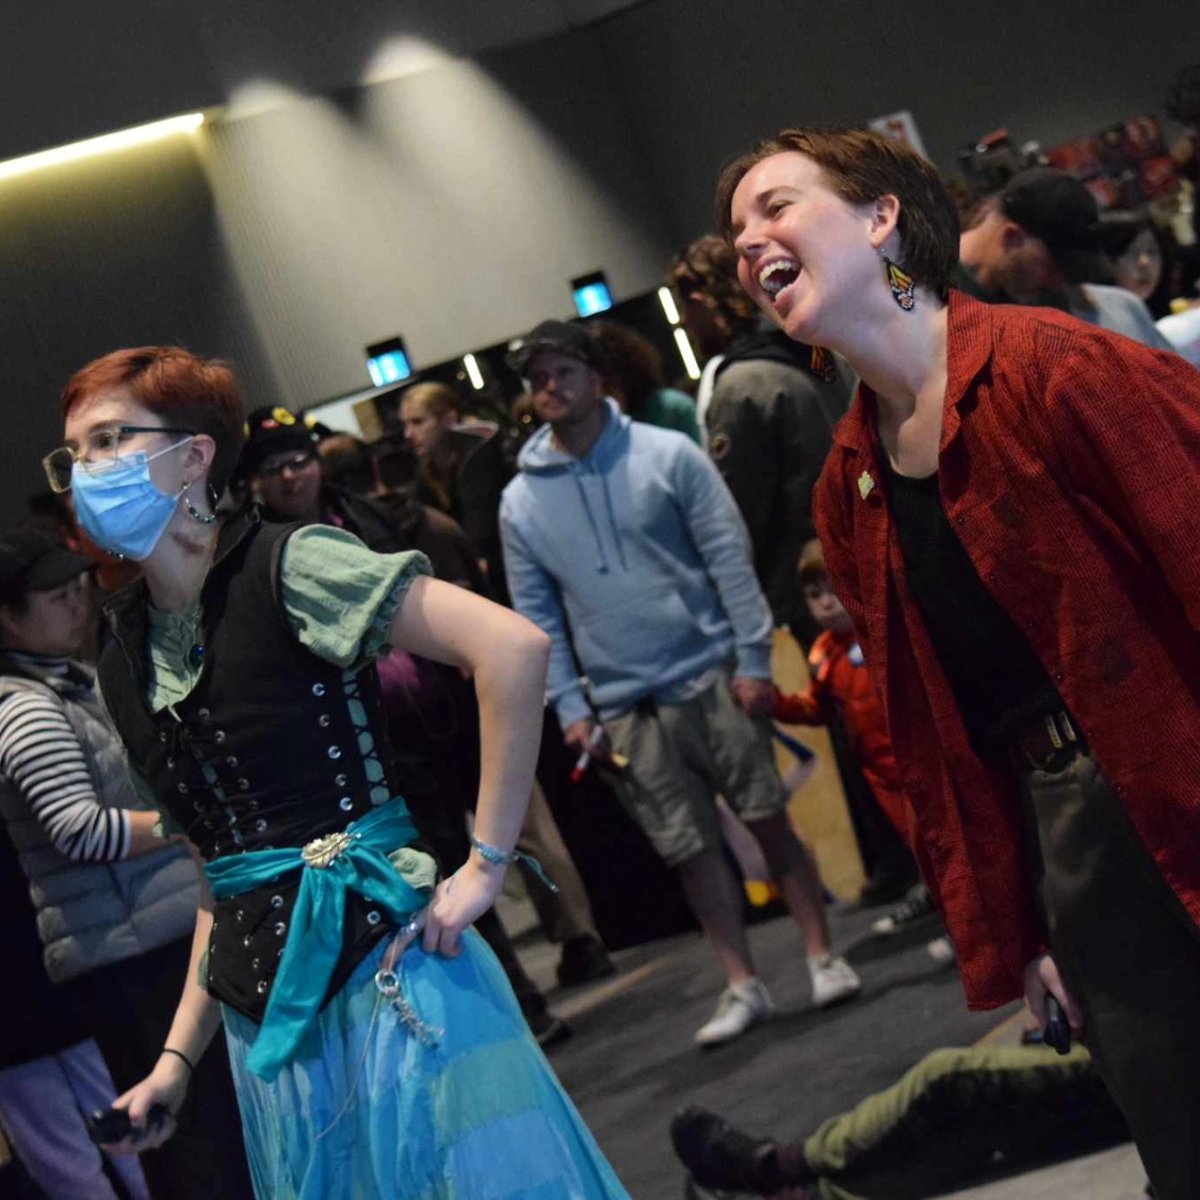 What a day that was Ōtautahi 💚 we had an INCREDIBLE time at #chchgeddon! Come back tomorrow for another day of geeky fun ✨️ Grab your tickets at the door or online here: bit.ly/47TtHsB See the showguide to see what we've got going on: armageddonexpo.com/showguide